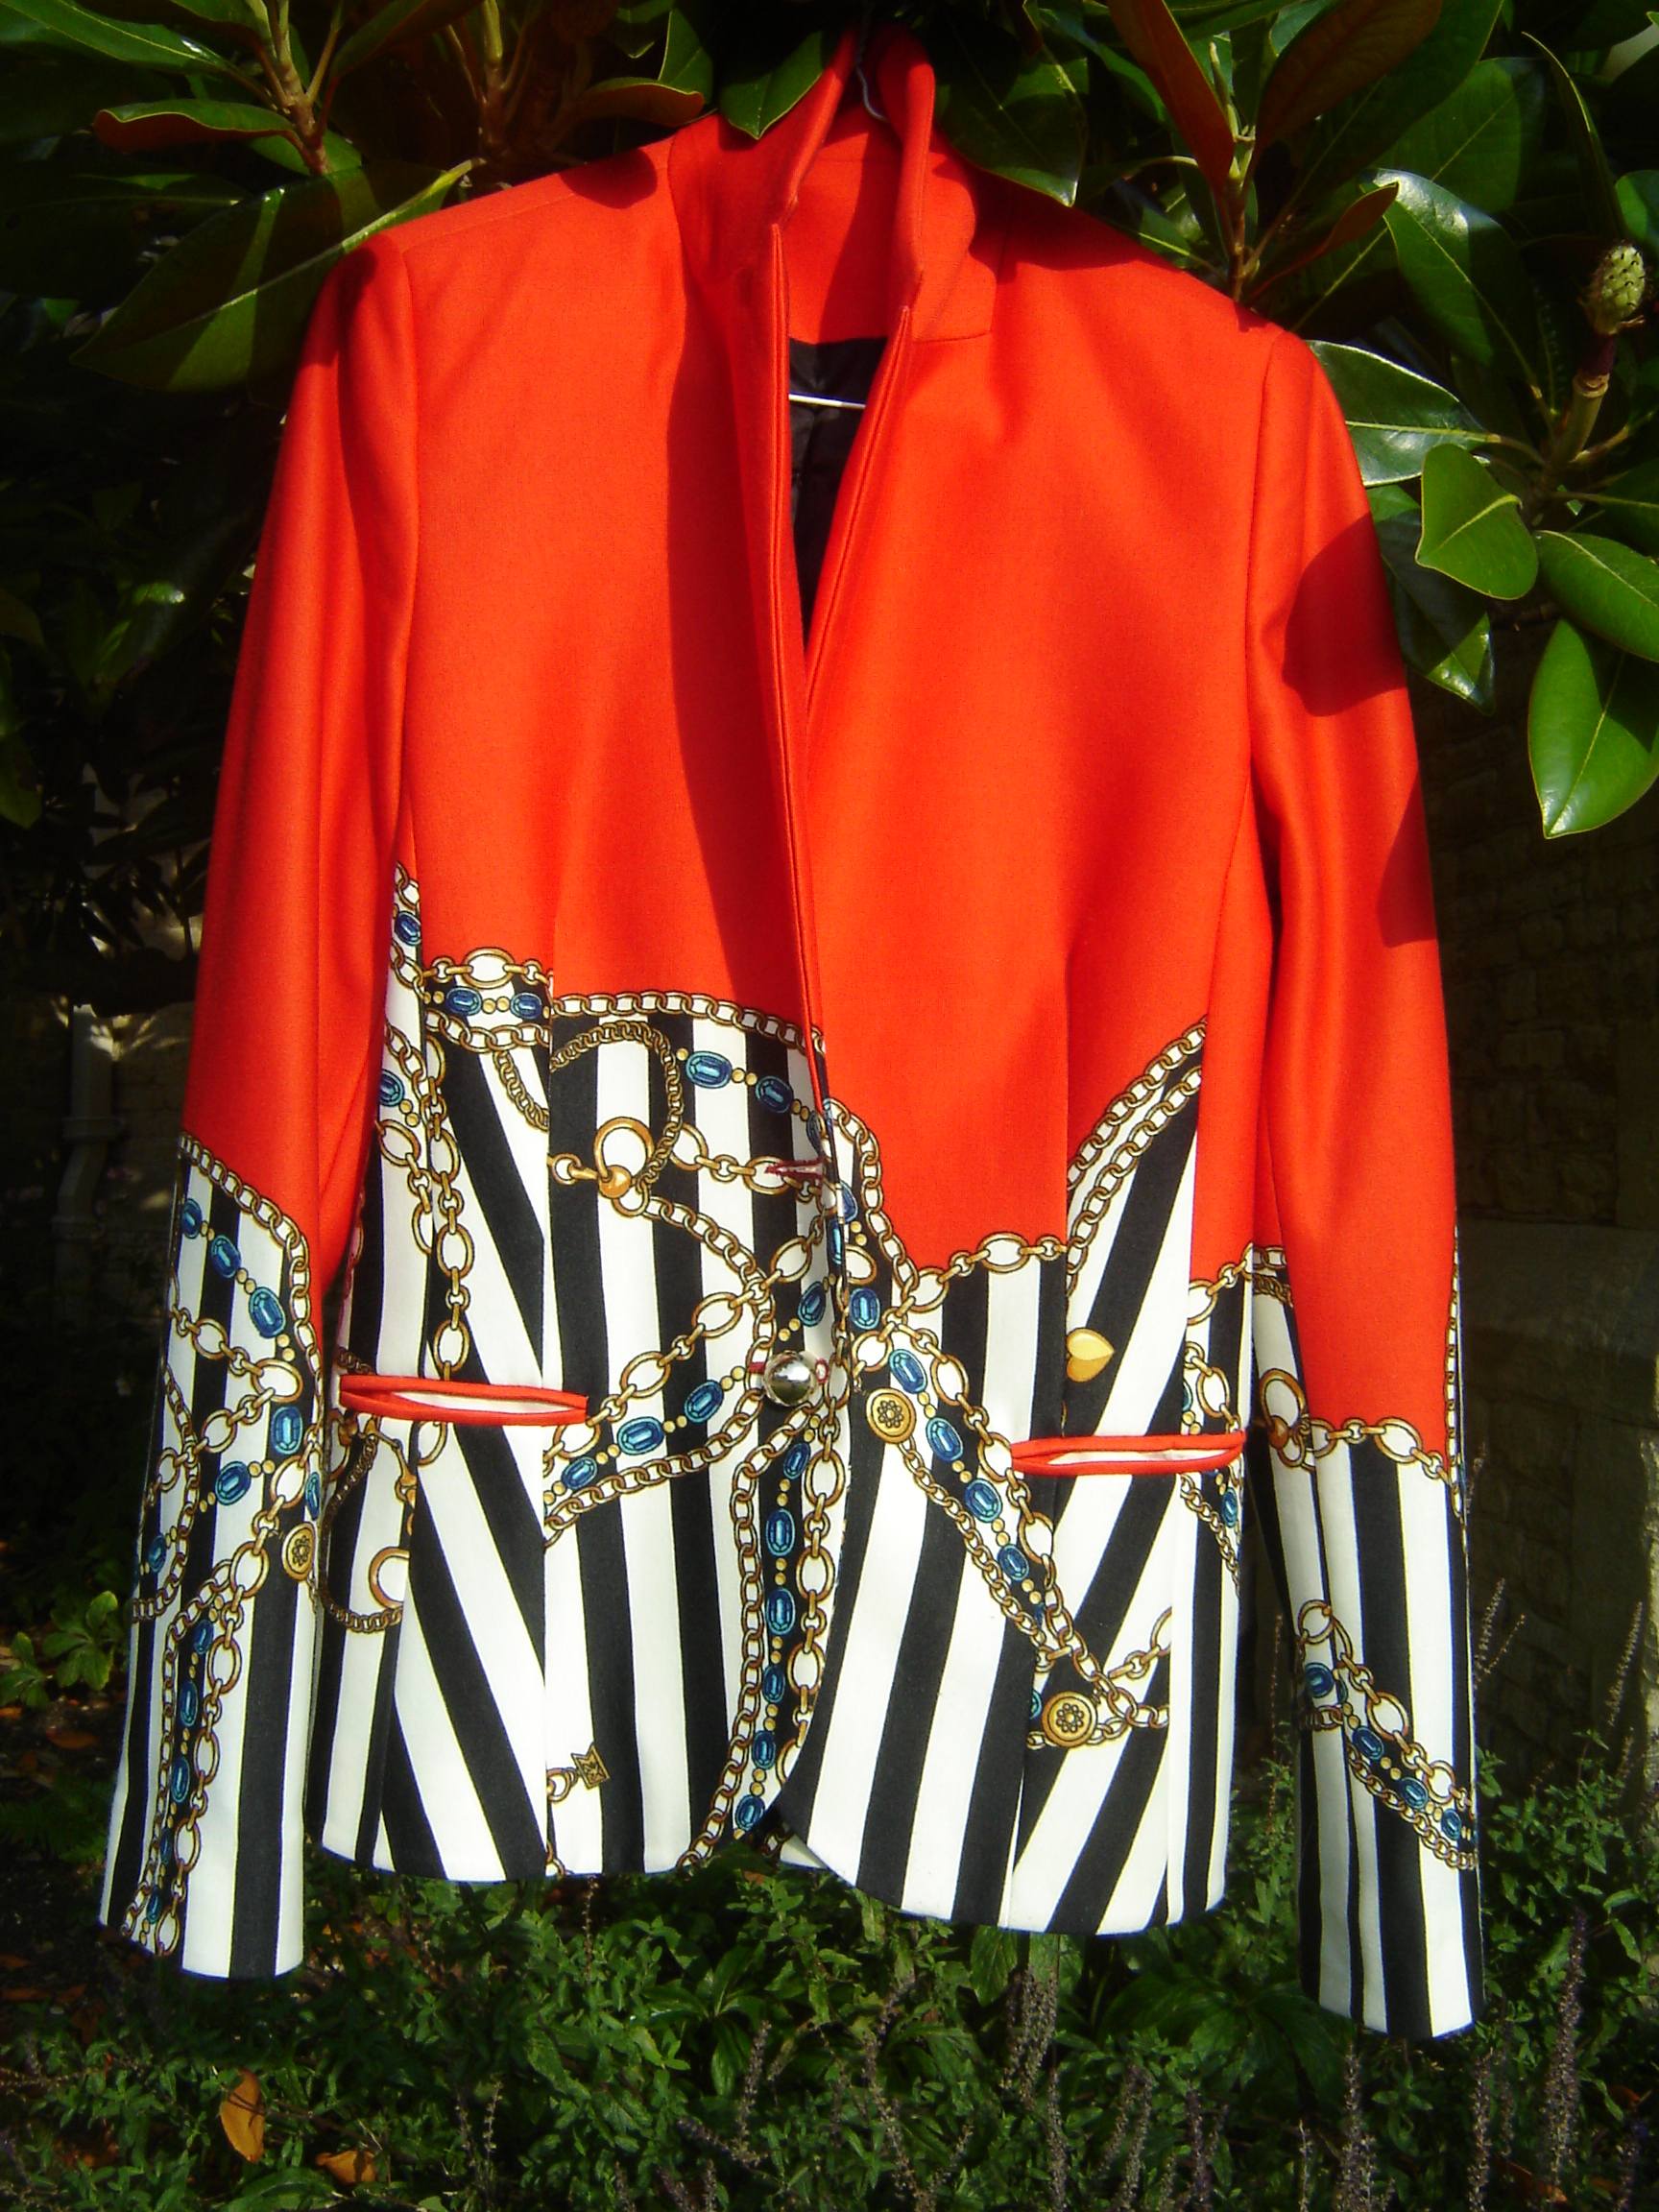 Red wool jacket with printed chain design.